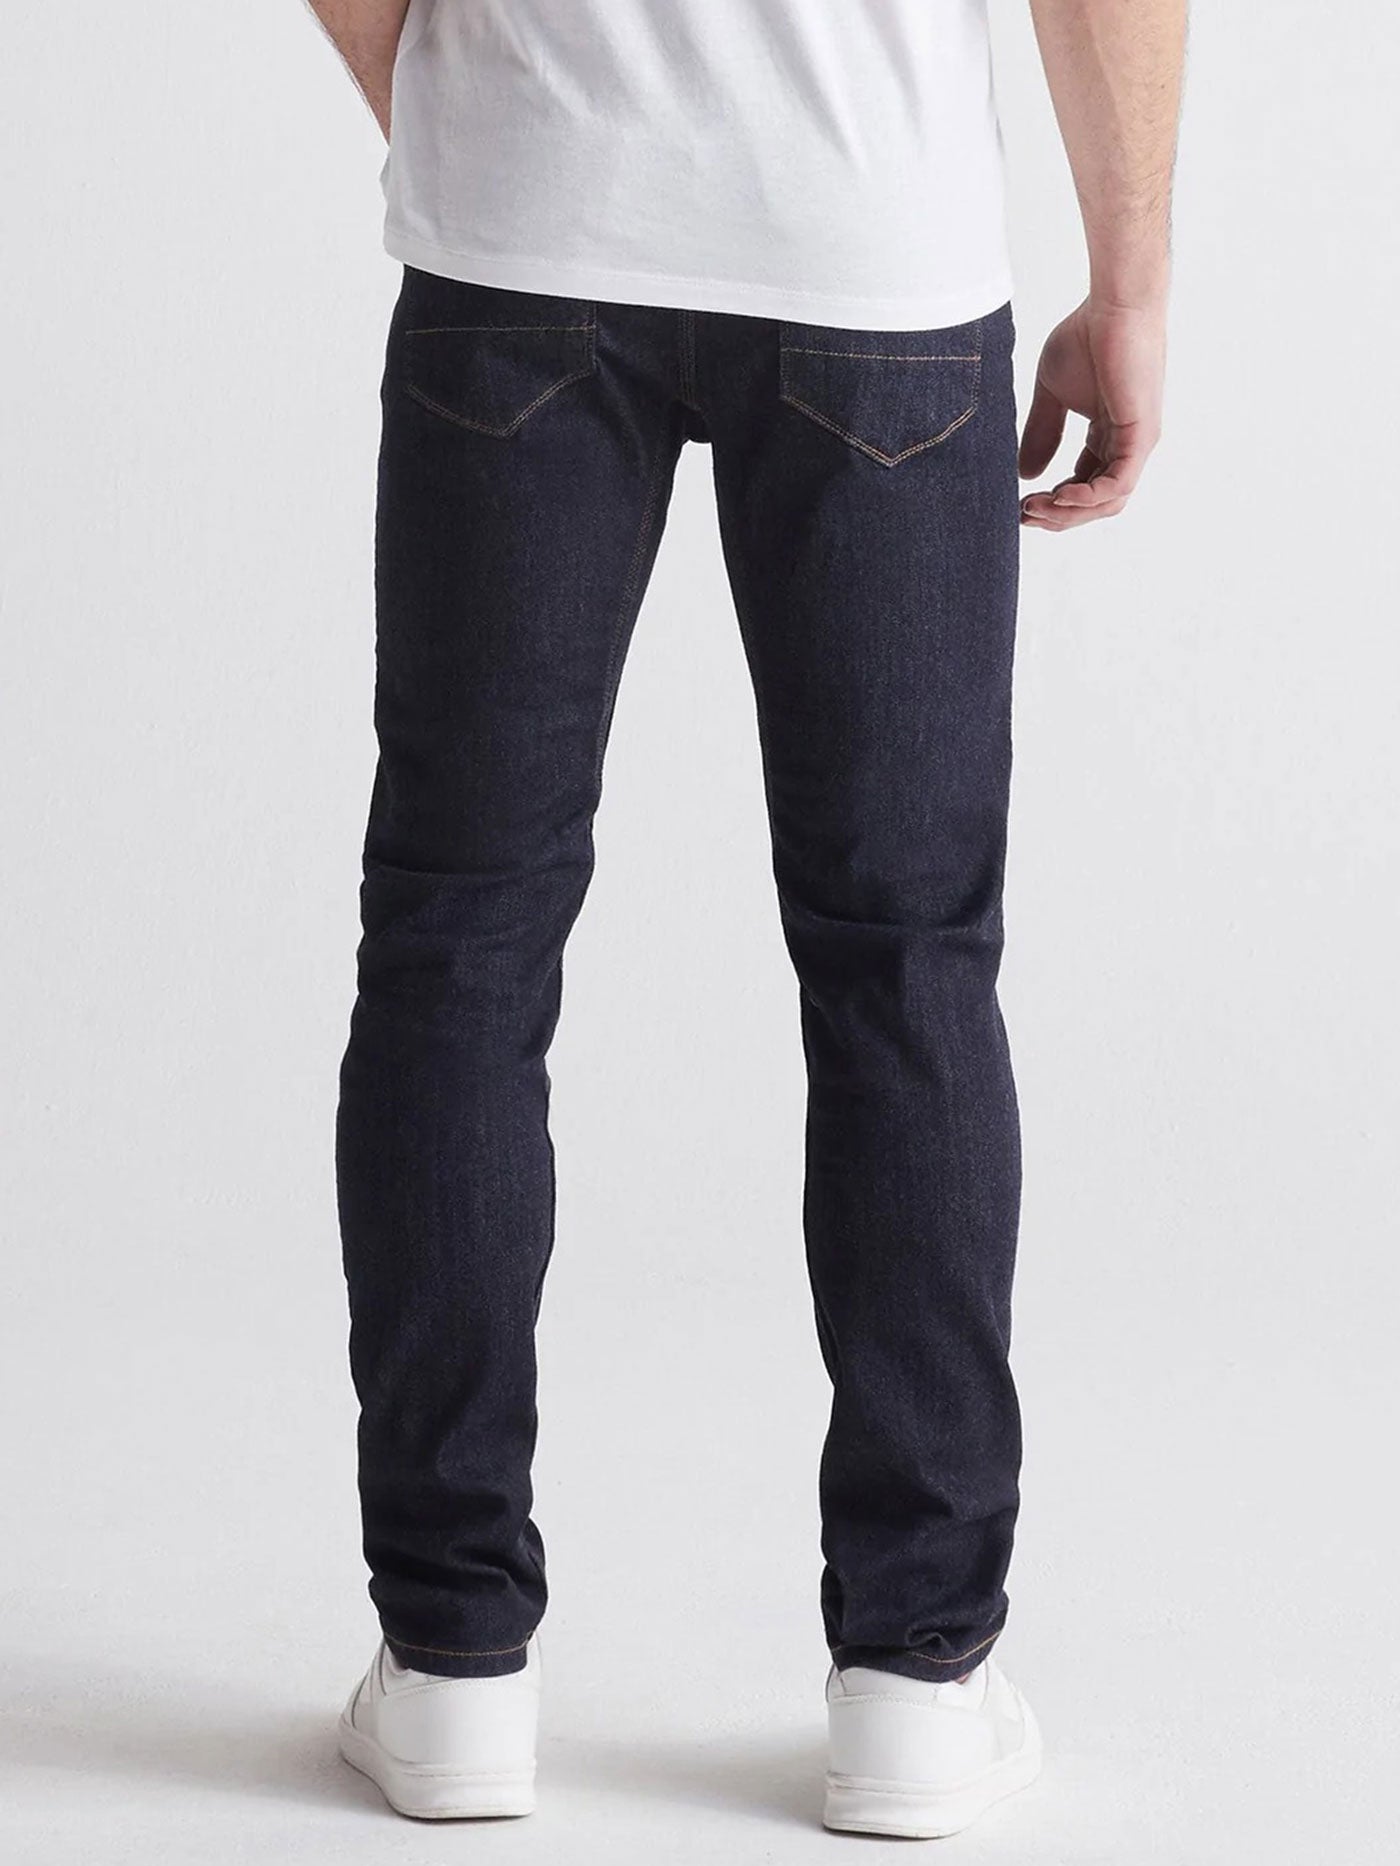 Buyr.com | Jeans | Duer Men's Performance Denim Relaxed Taper - Galactic,  30W X 34L